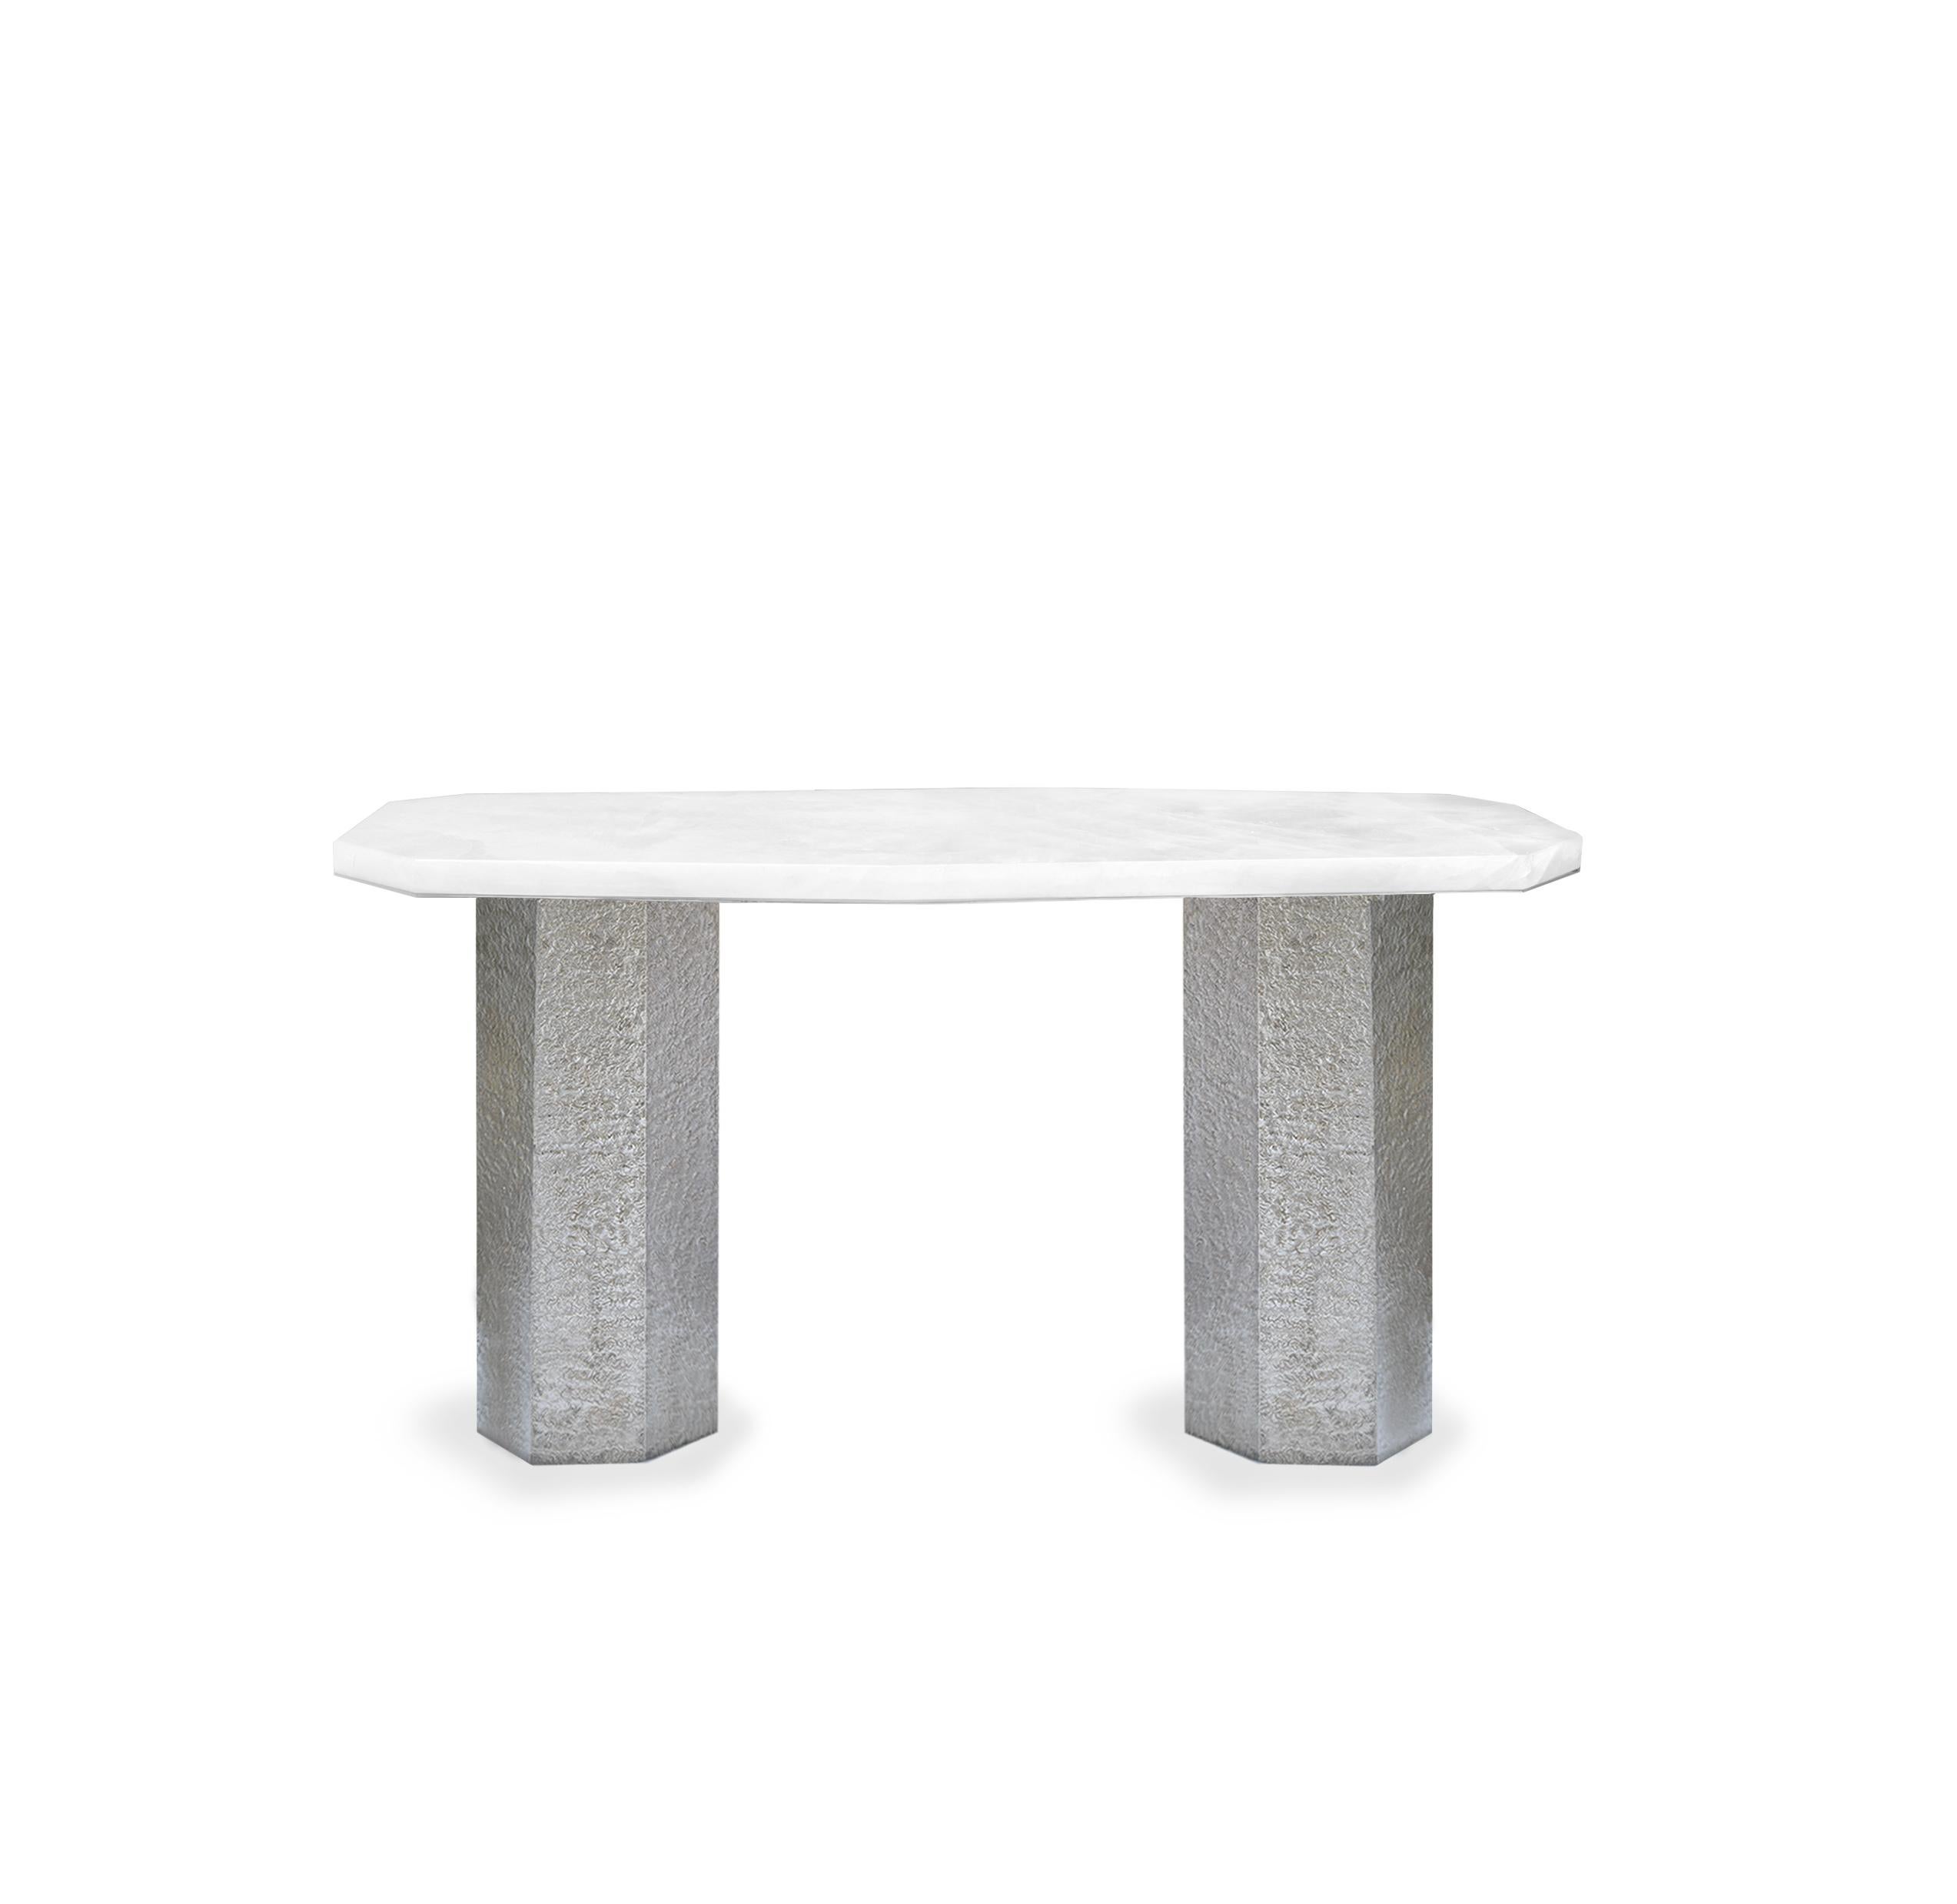 Elegant form rock crystal console table with hammered nickel base. Created by Phoenix, NYC.
Custom size upon request.